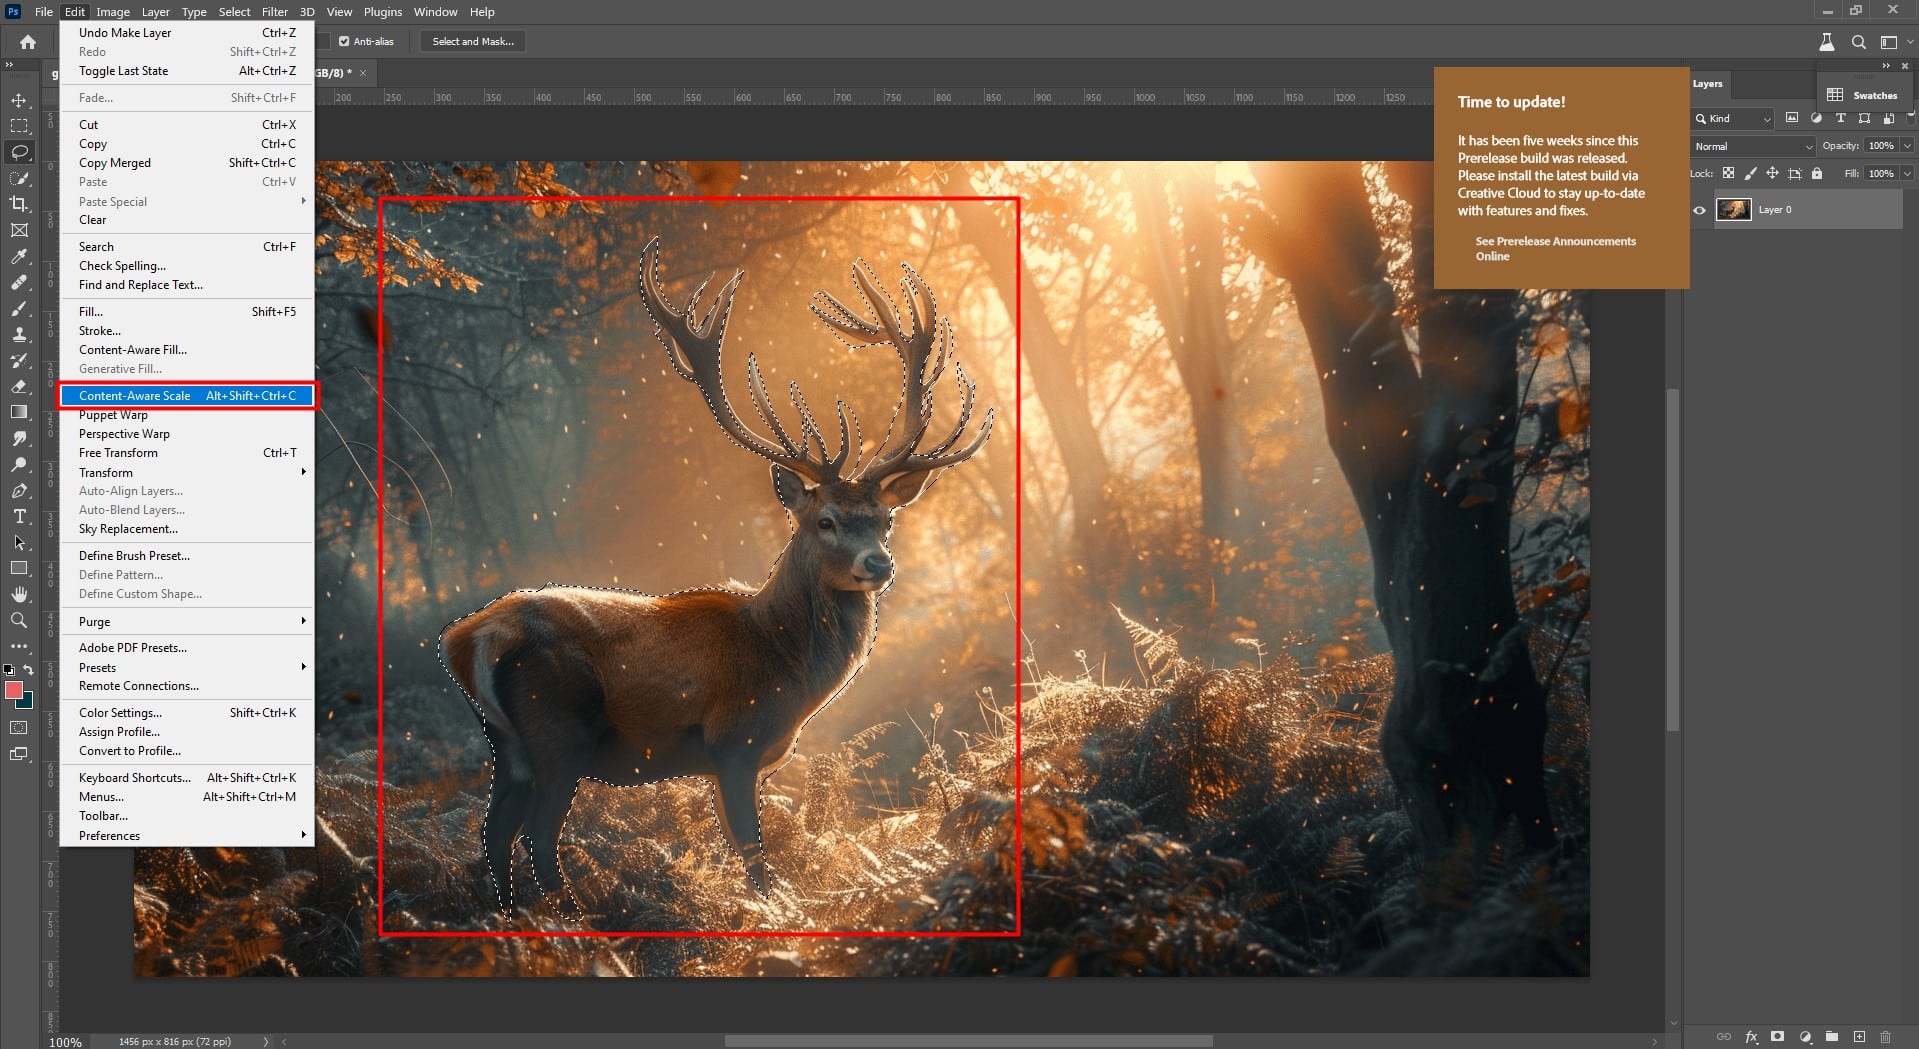 Adobe Photoshop interface showing the use of the Content-Aware Fill tool on an image of a majestic deer standing in a sunlit forest.